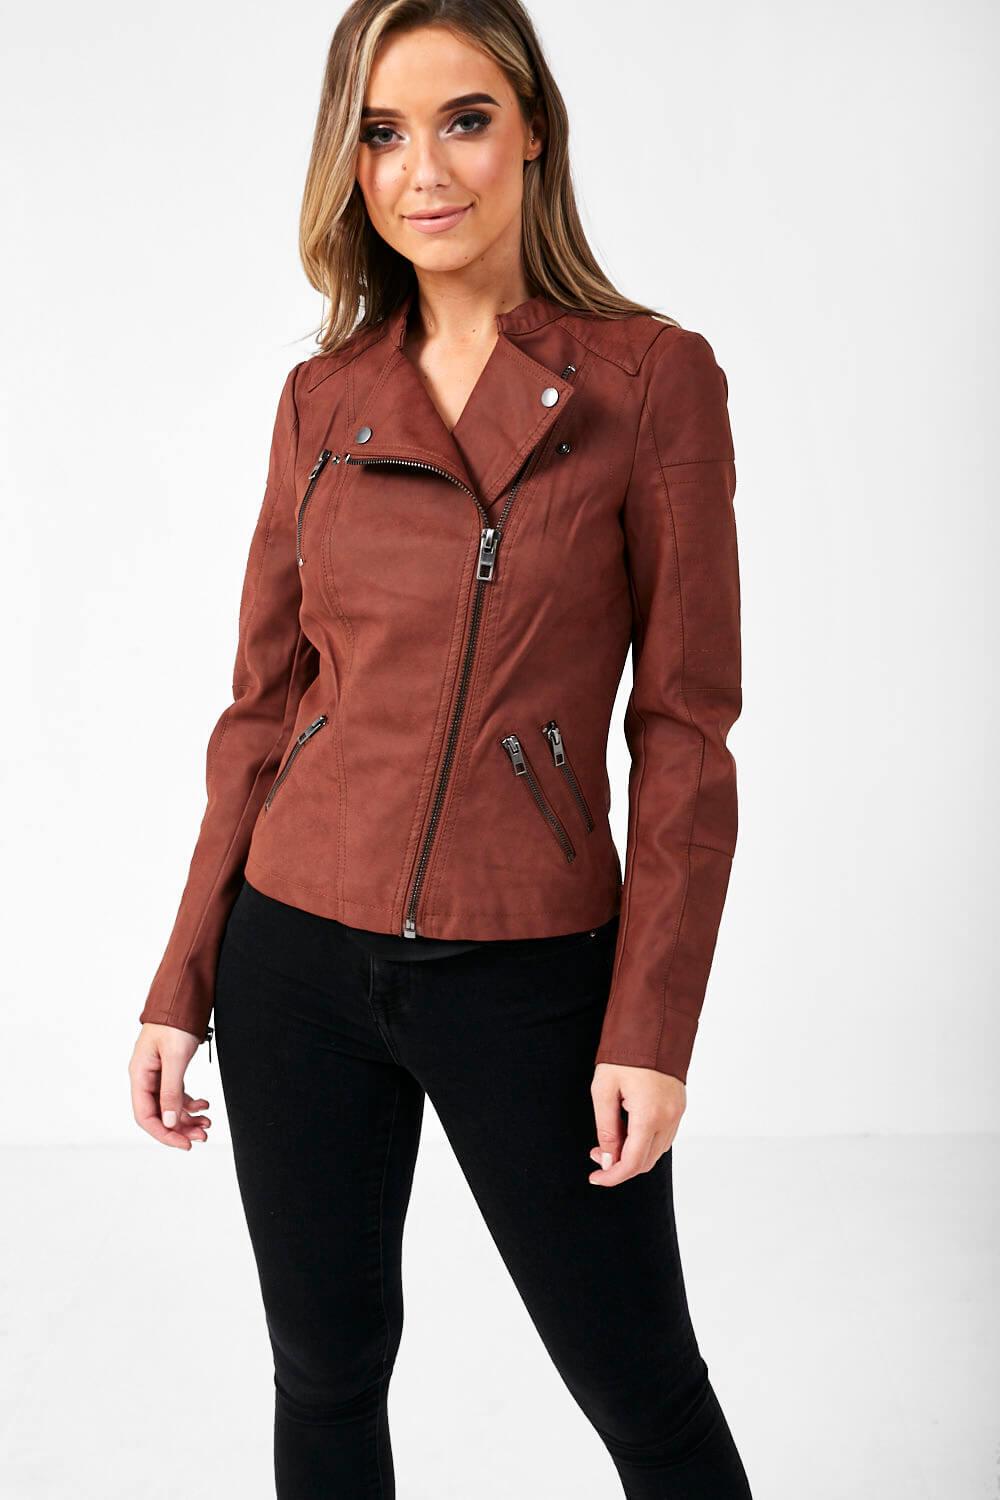 overtuigen Editie Klein Only Ava Faux Leather Biker Jacket in Mahogany | iCLOTHING - iCLOTHING